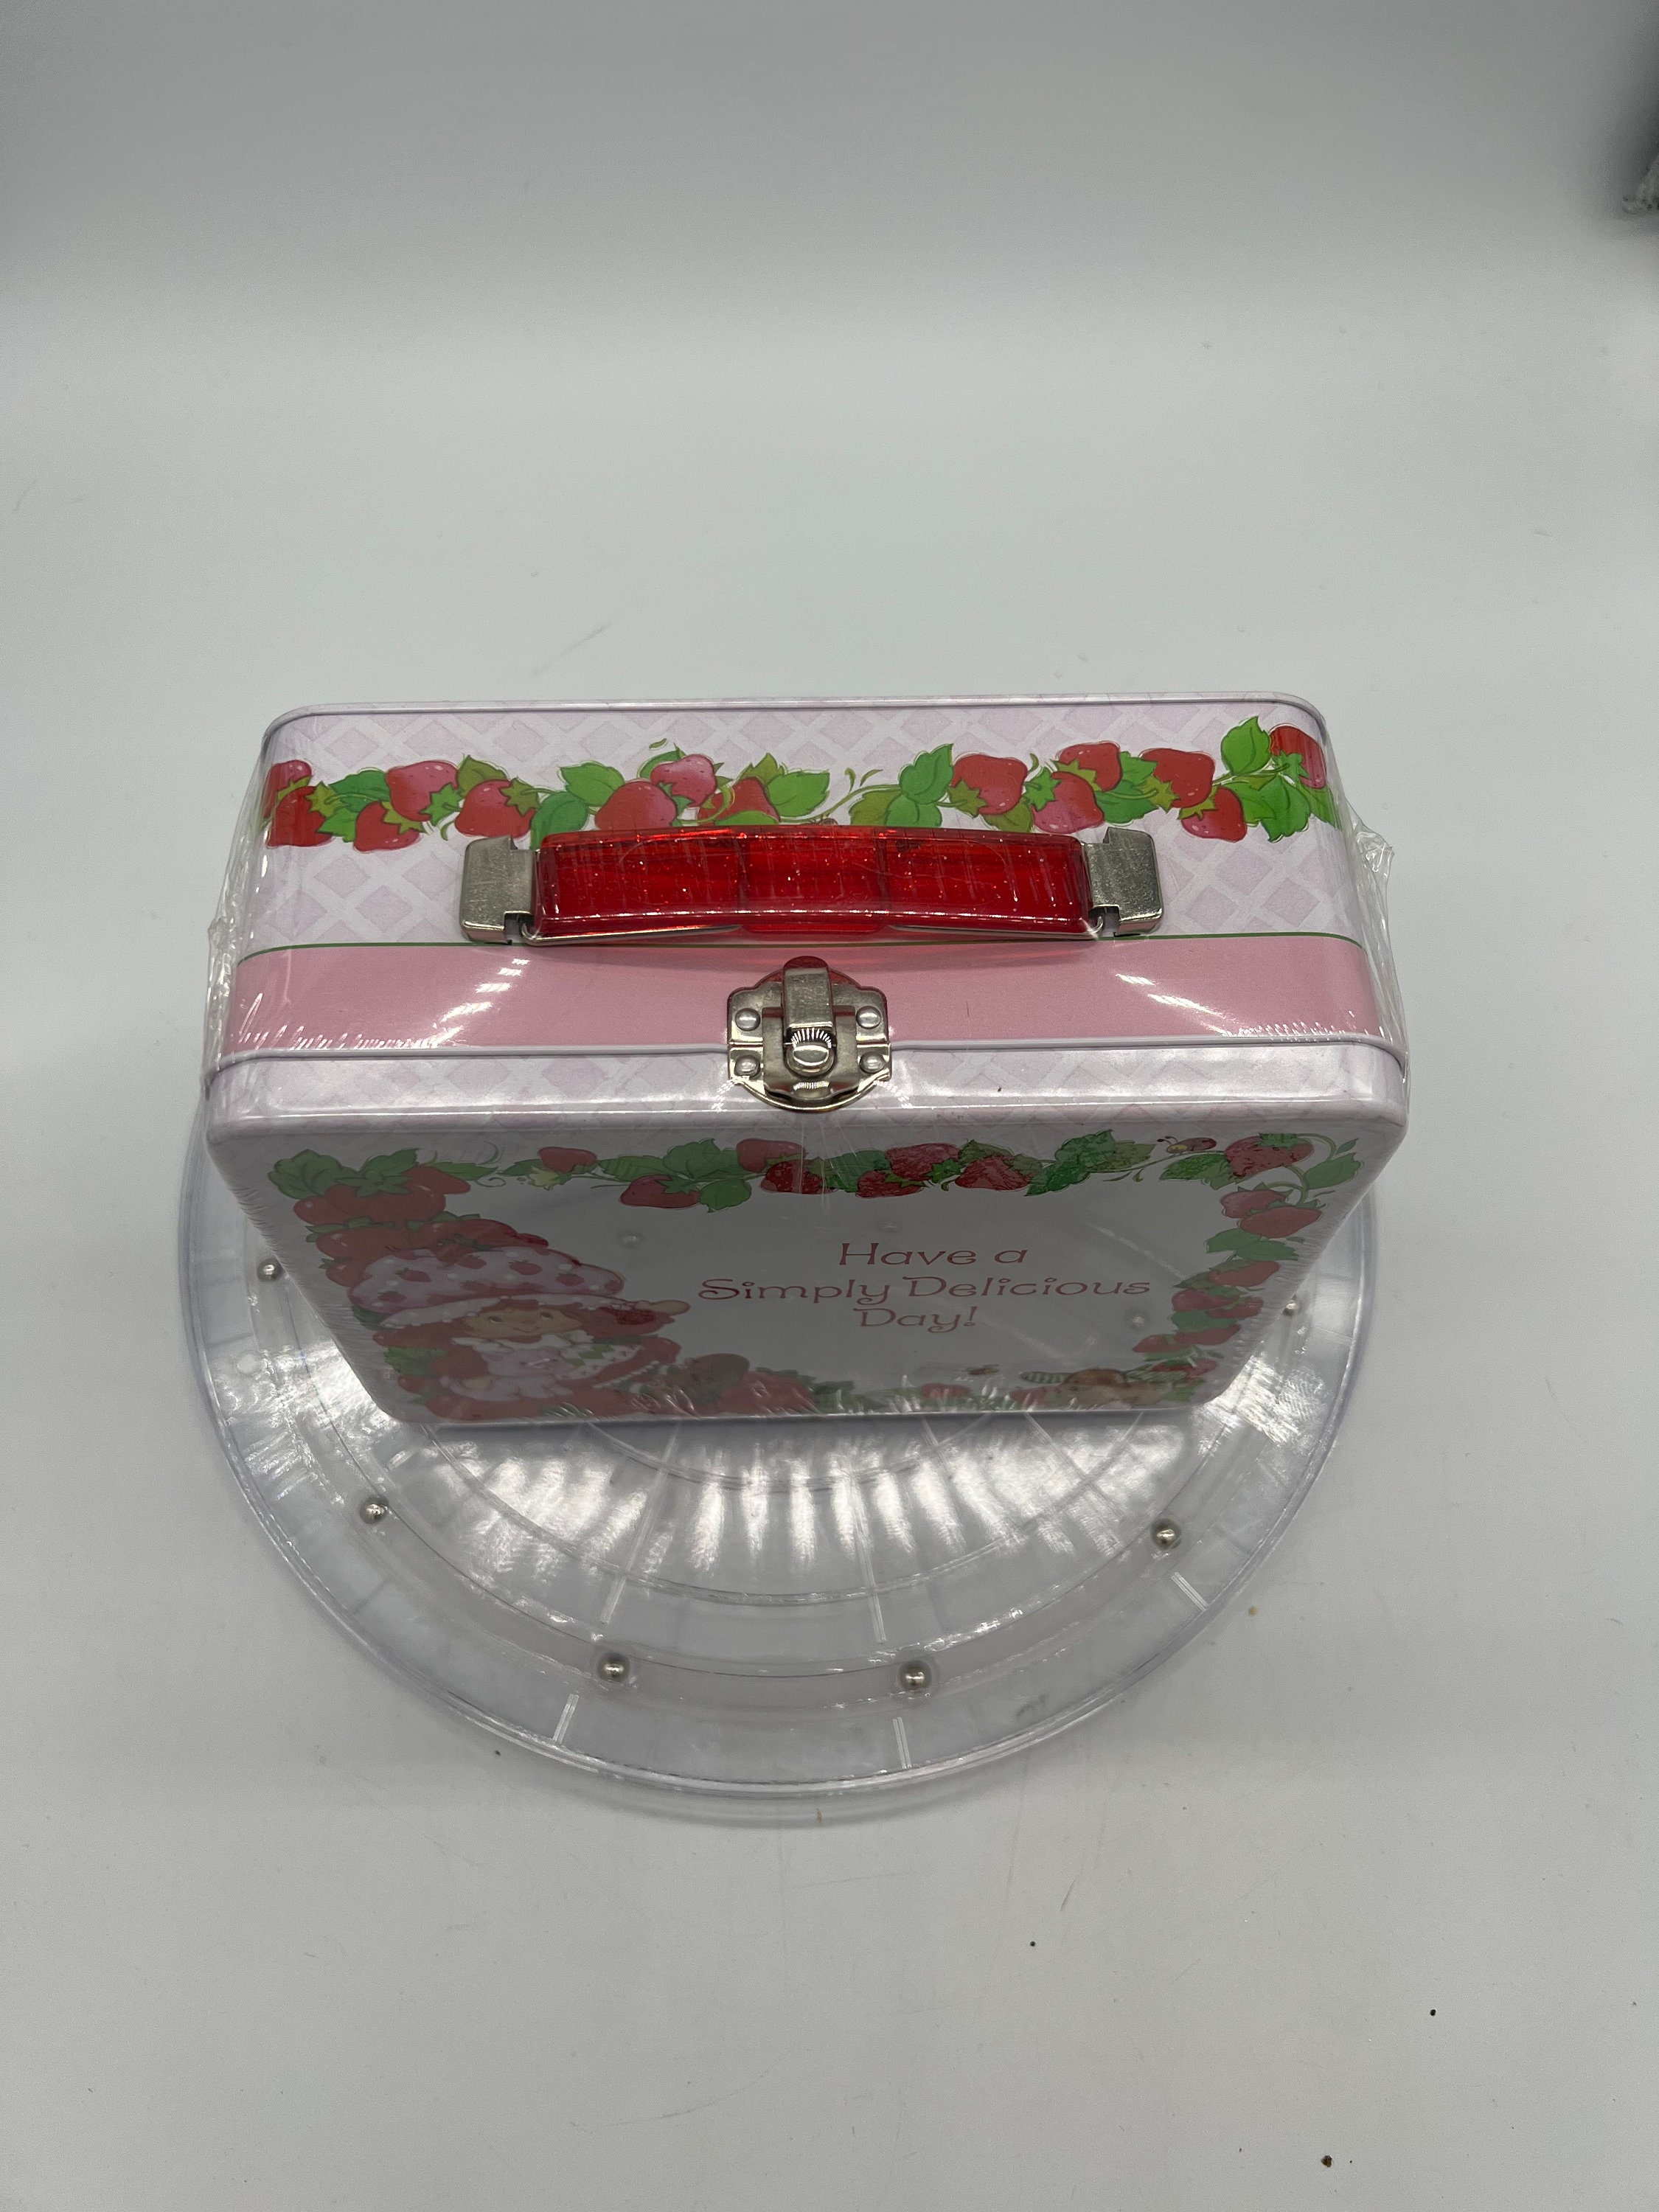 Strawberry Shortcake Friendship Tin Lunch box Embossed Snack Lunch